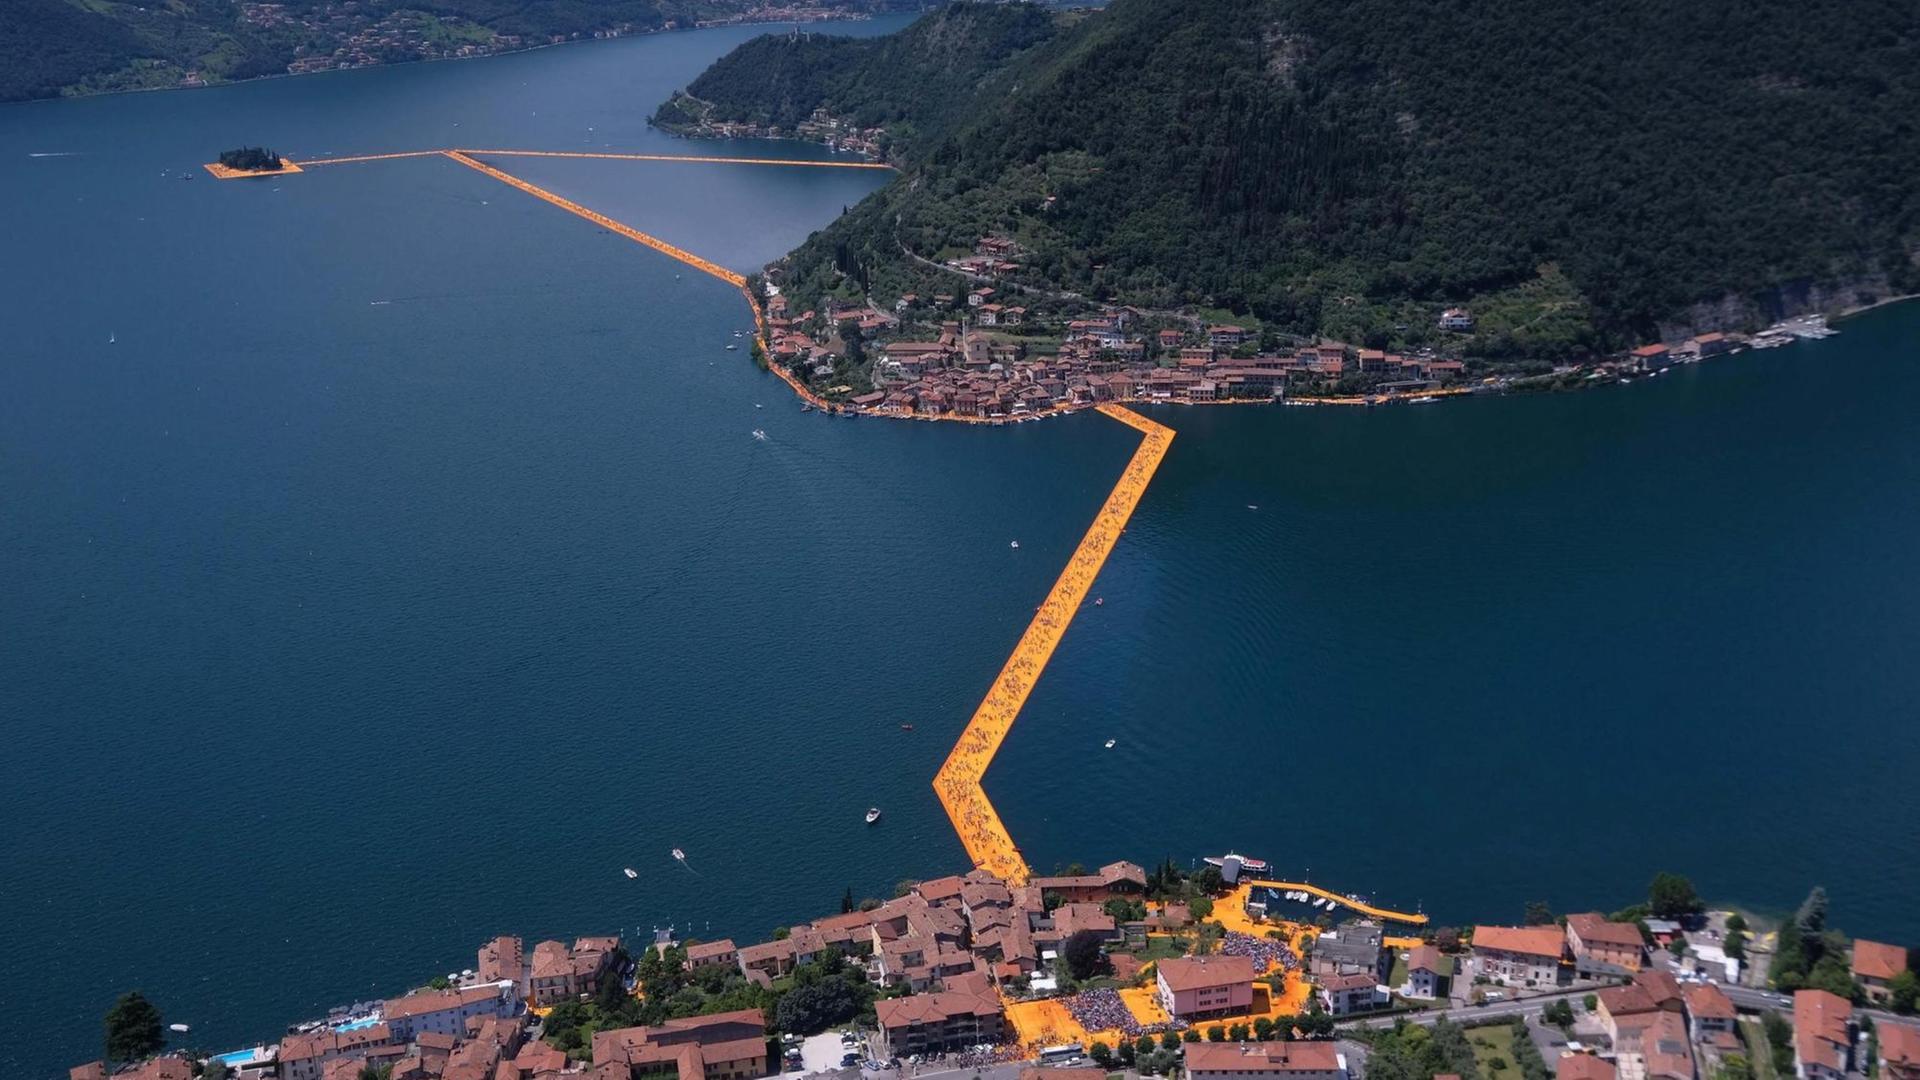 Christo's Projekt "The Floating Piers" am Lago d'Iseo in Italien.